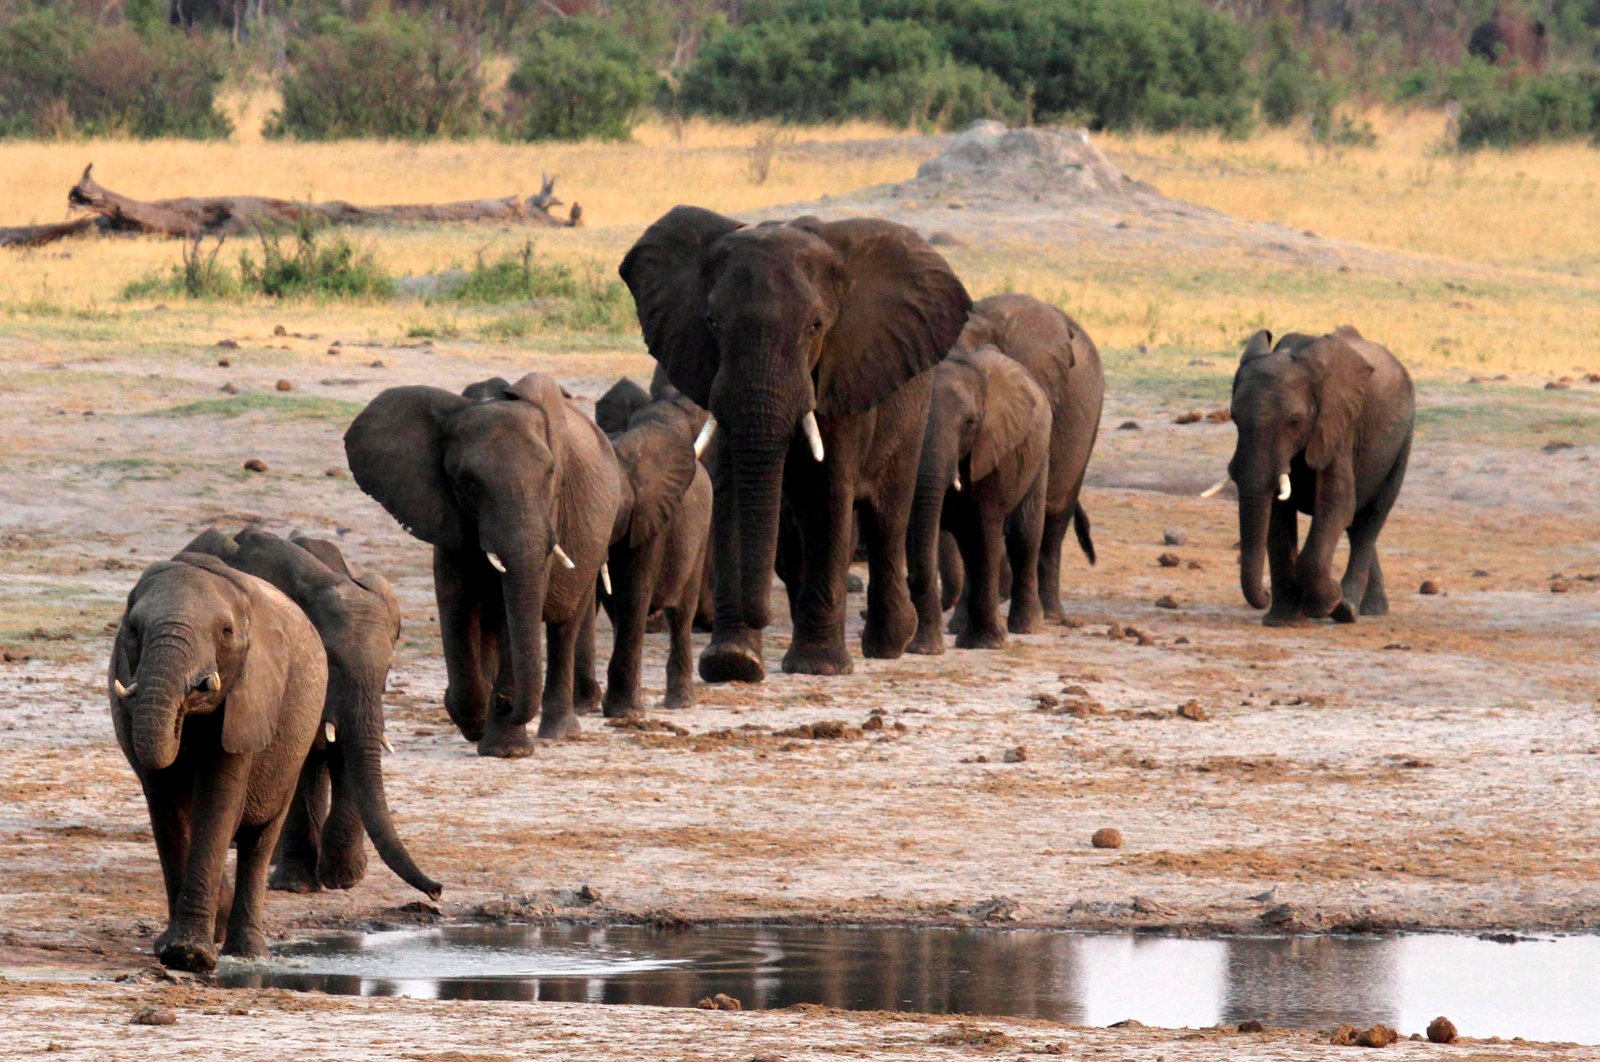 A herd of elephants walk past a watering hole in Hwange National Park, Zimbabwe, Oct. 14, 2014. (REUTERS Photo)